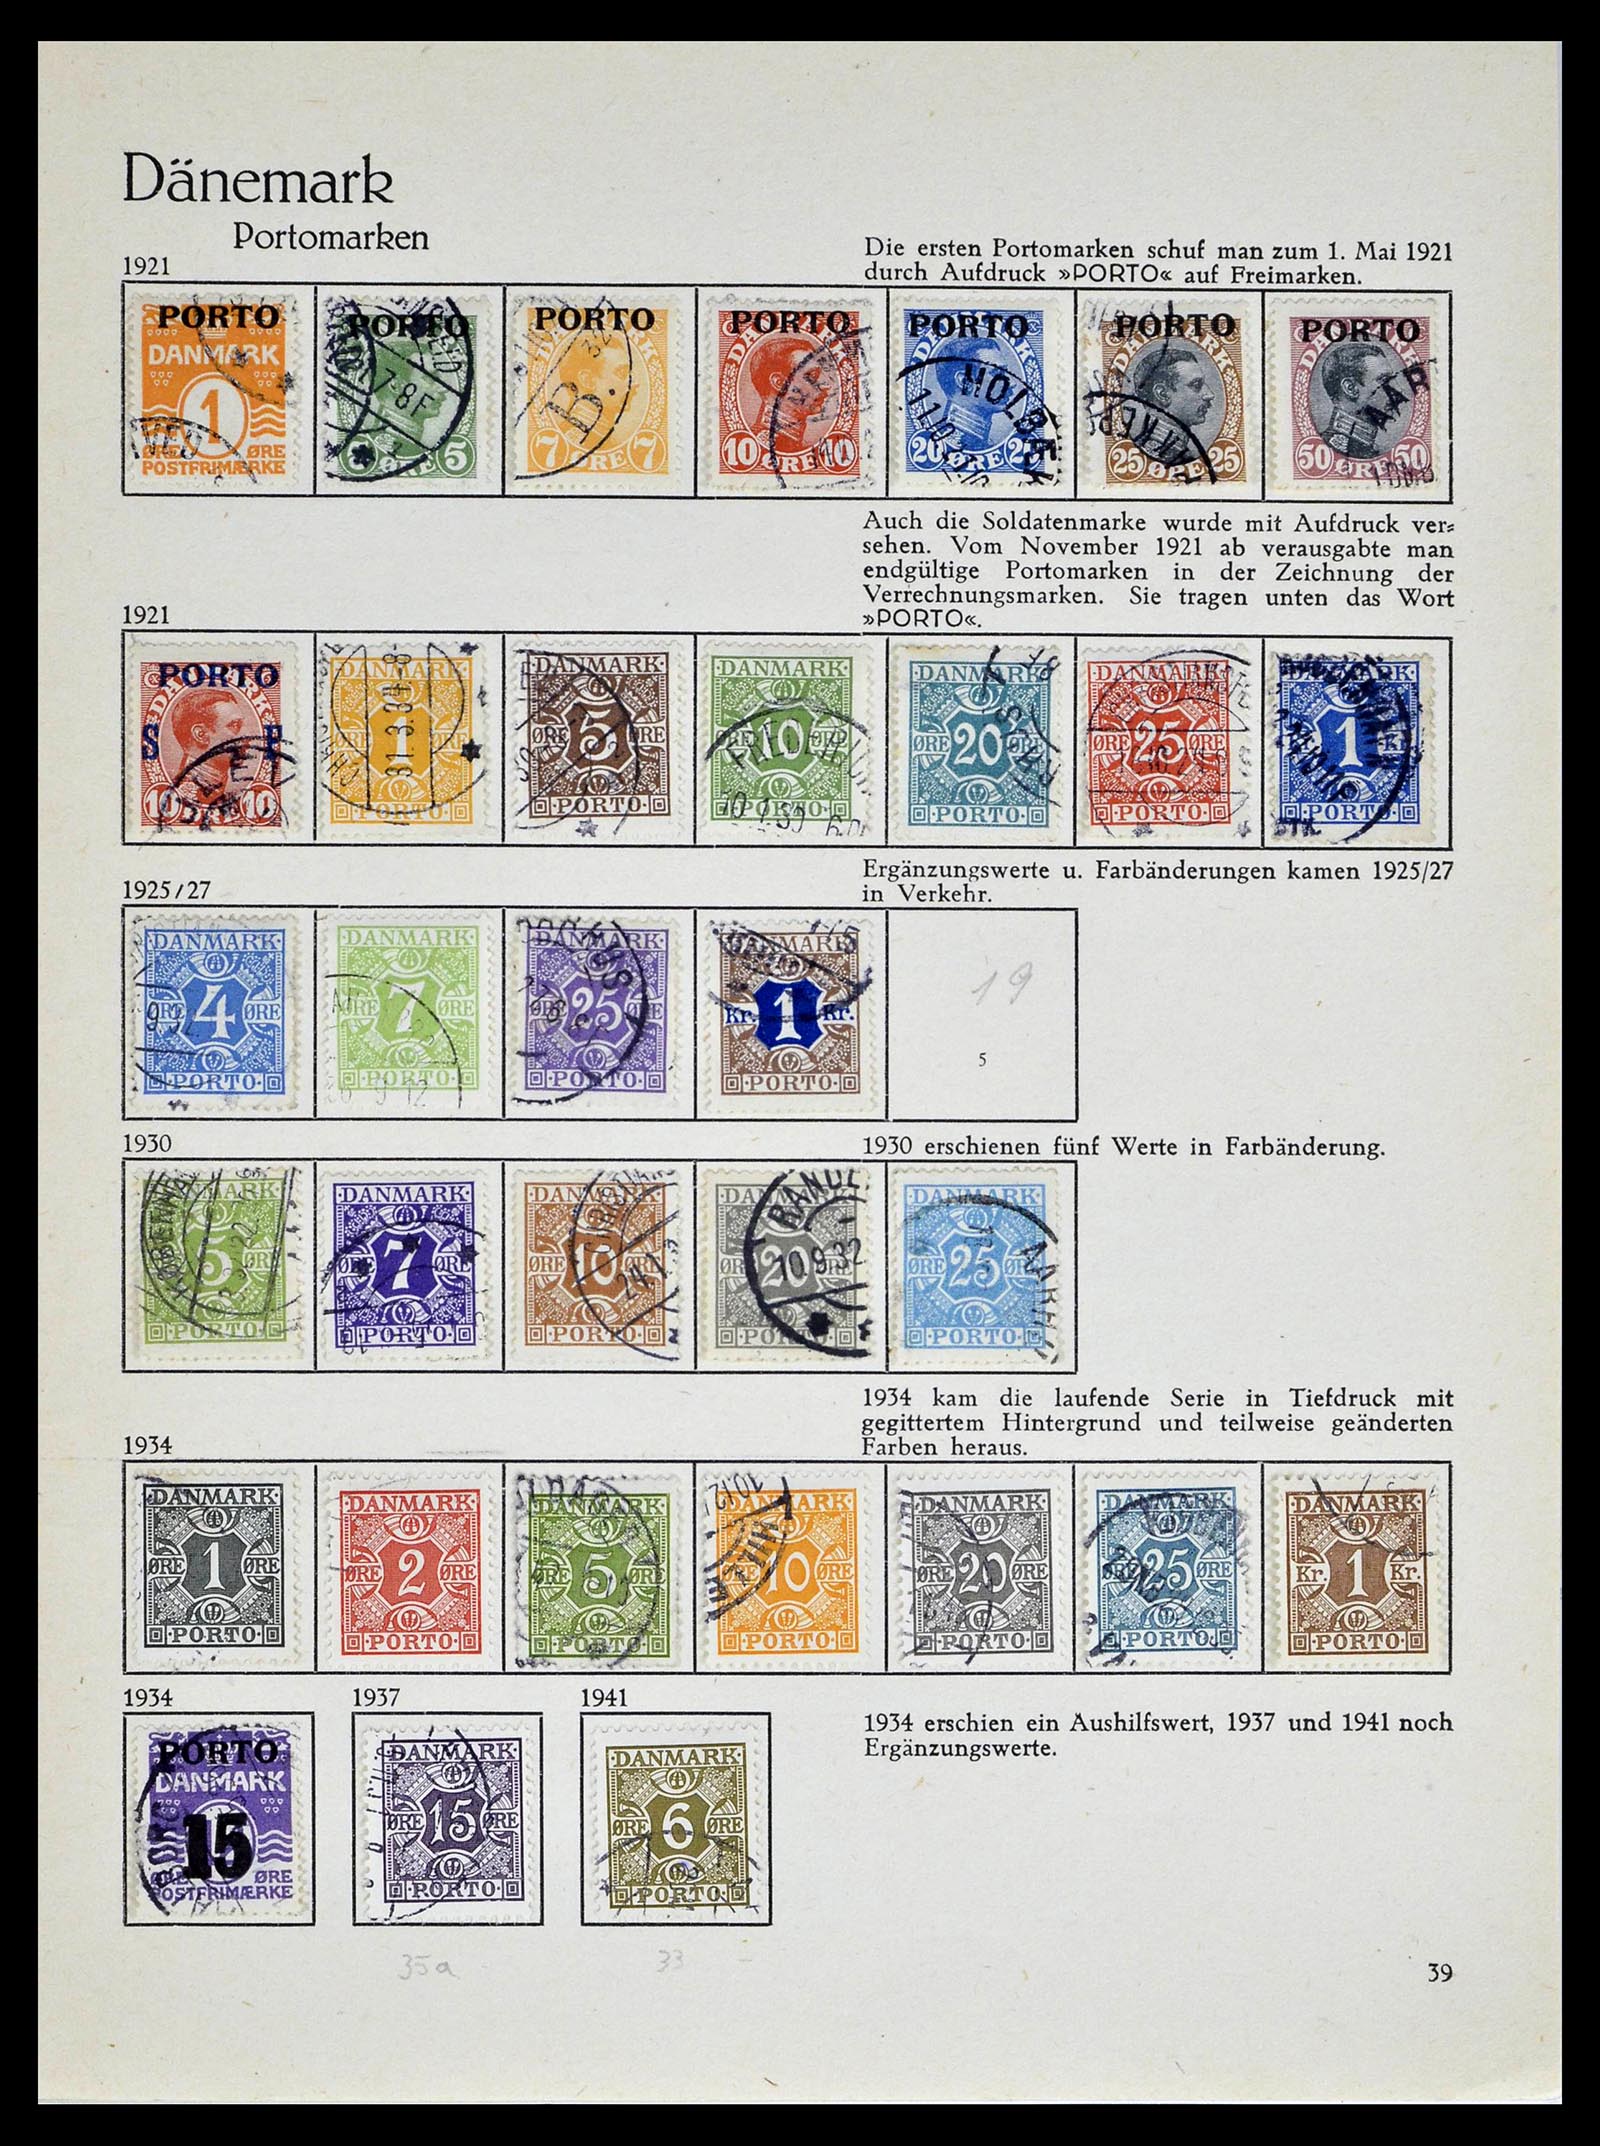 39407 0040 - Stamp collection 39407 Denmark 1851-1969.